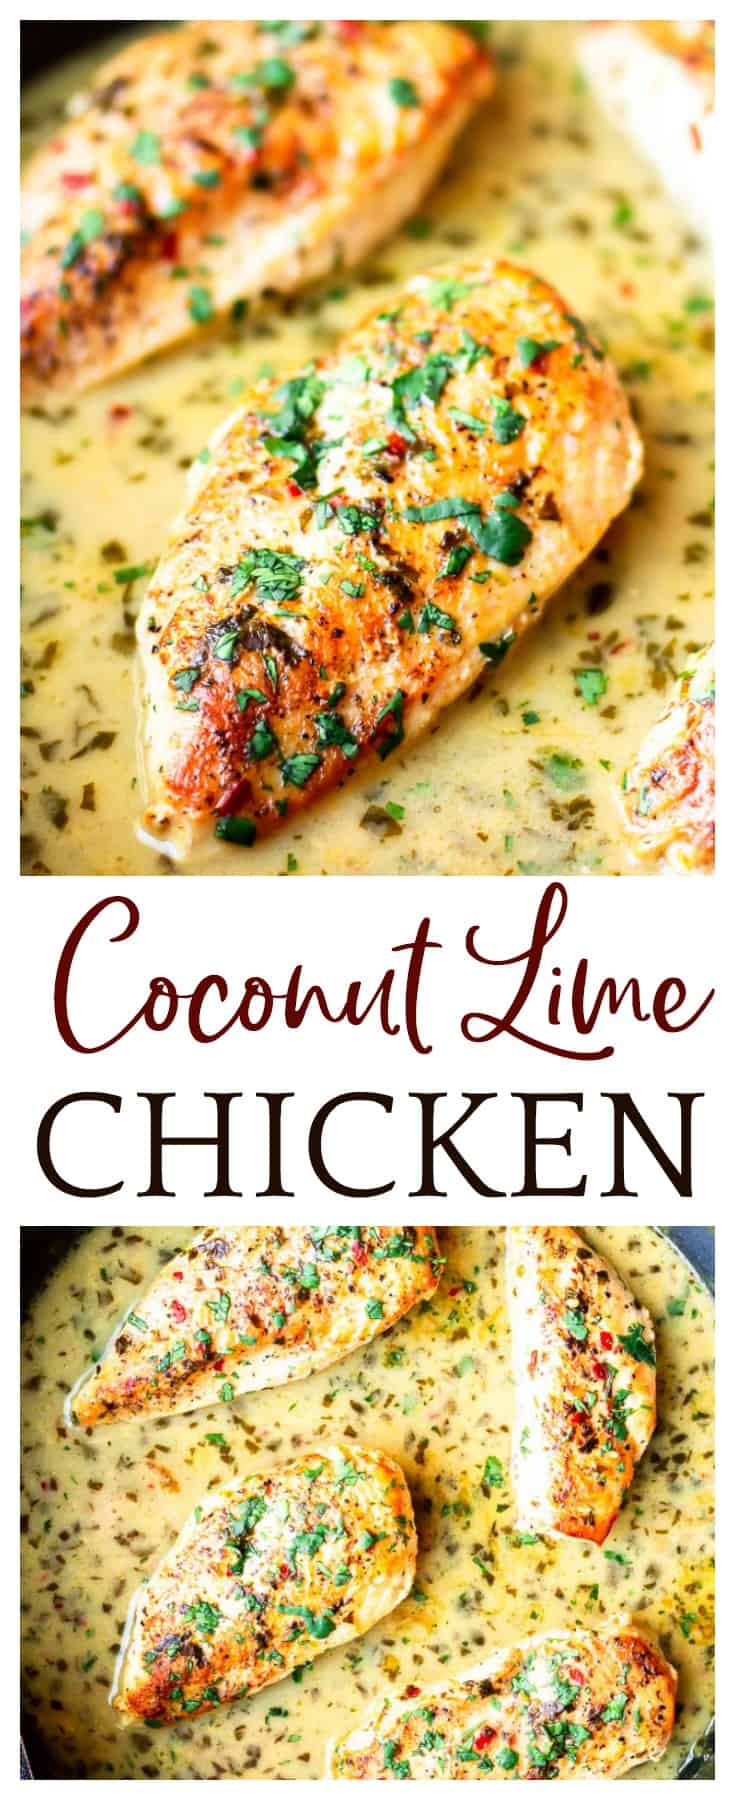 Pan Seared Coconut Lime Chicken Breasts Recipe - Delicious Little Bites